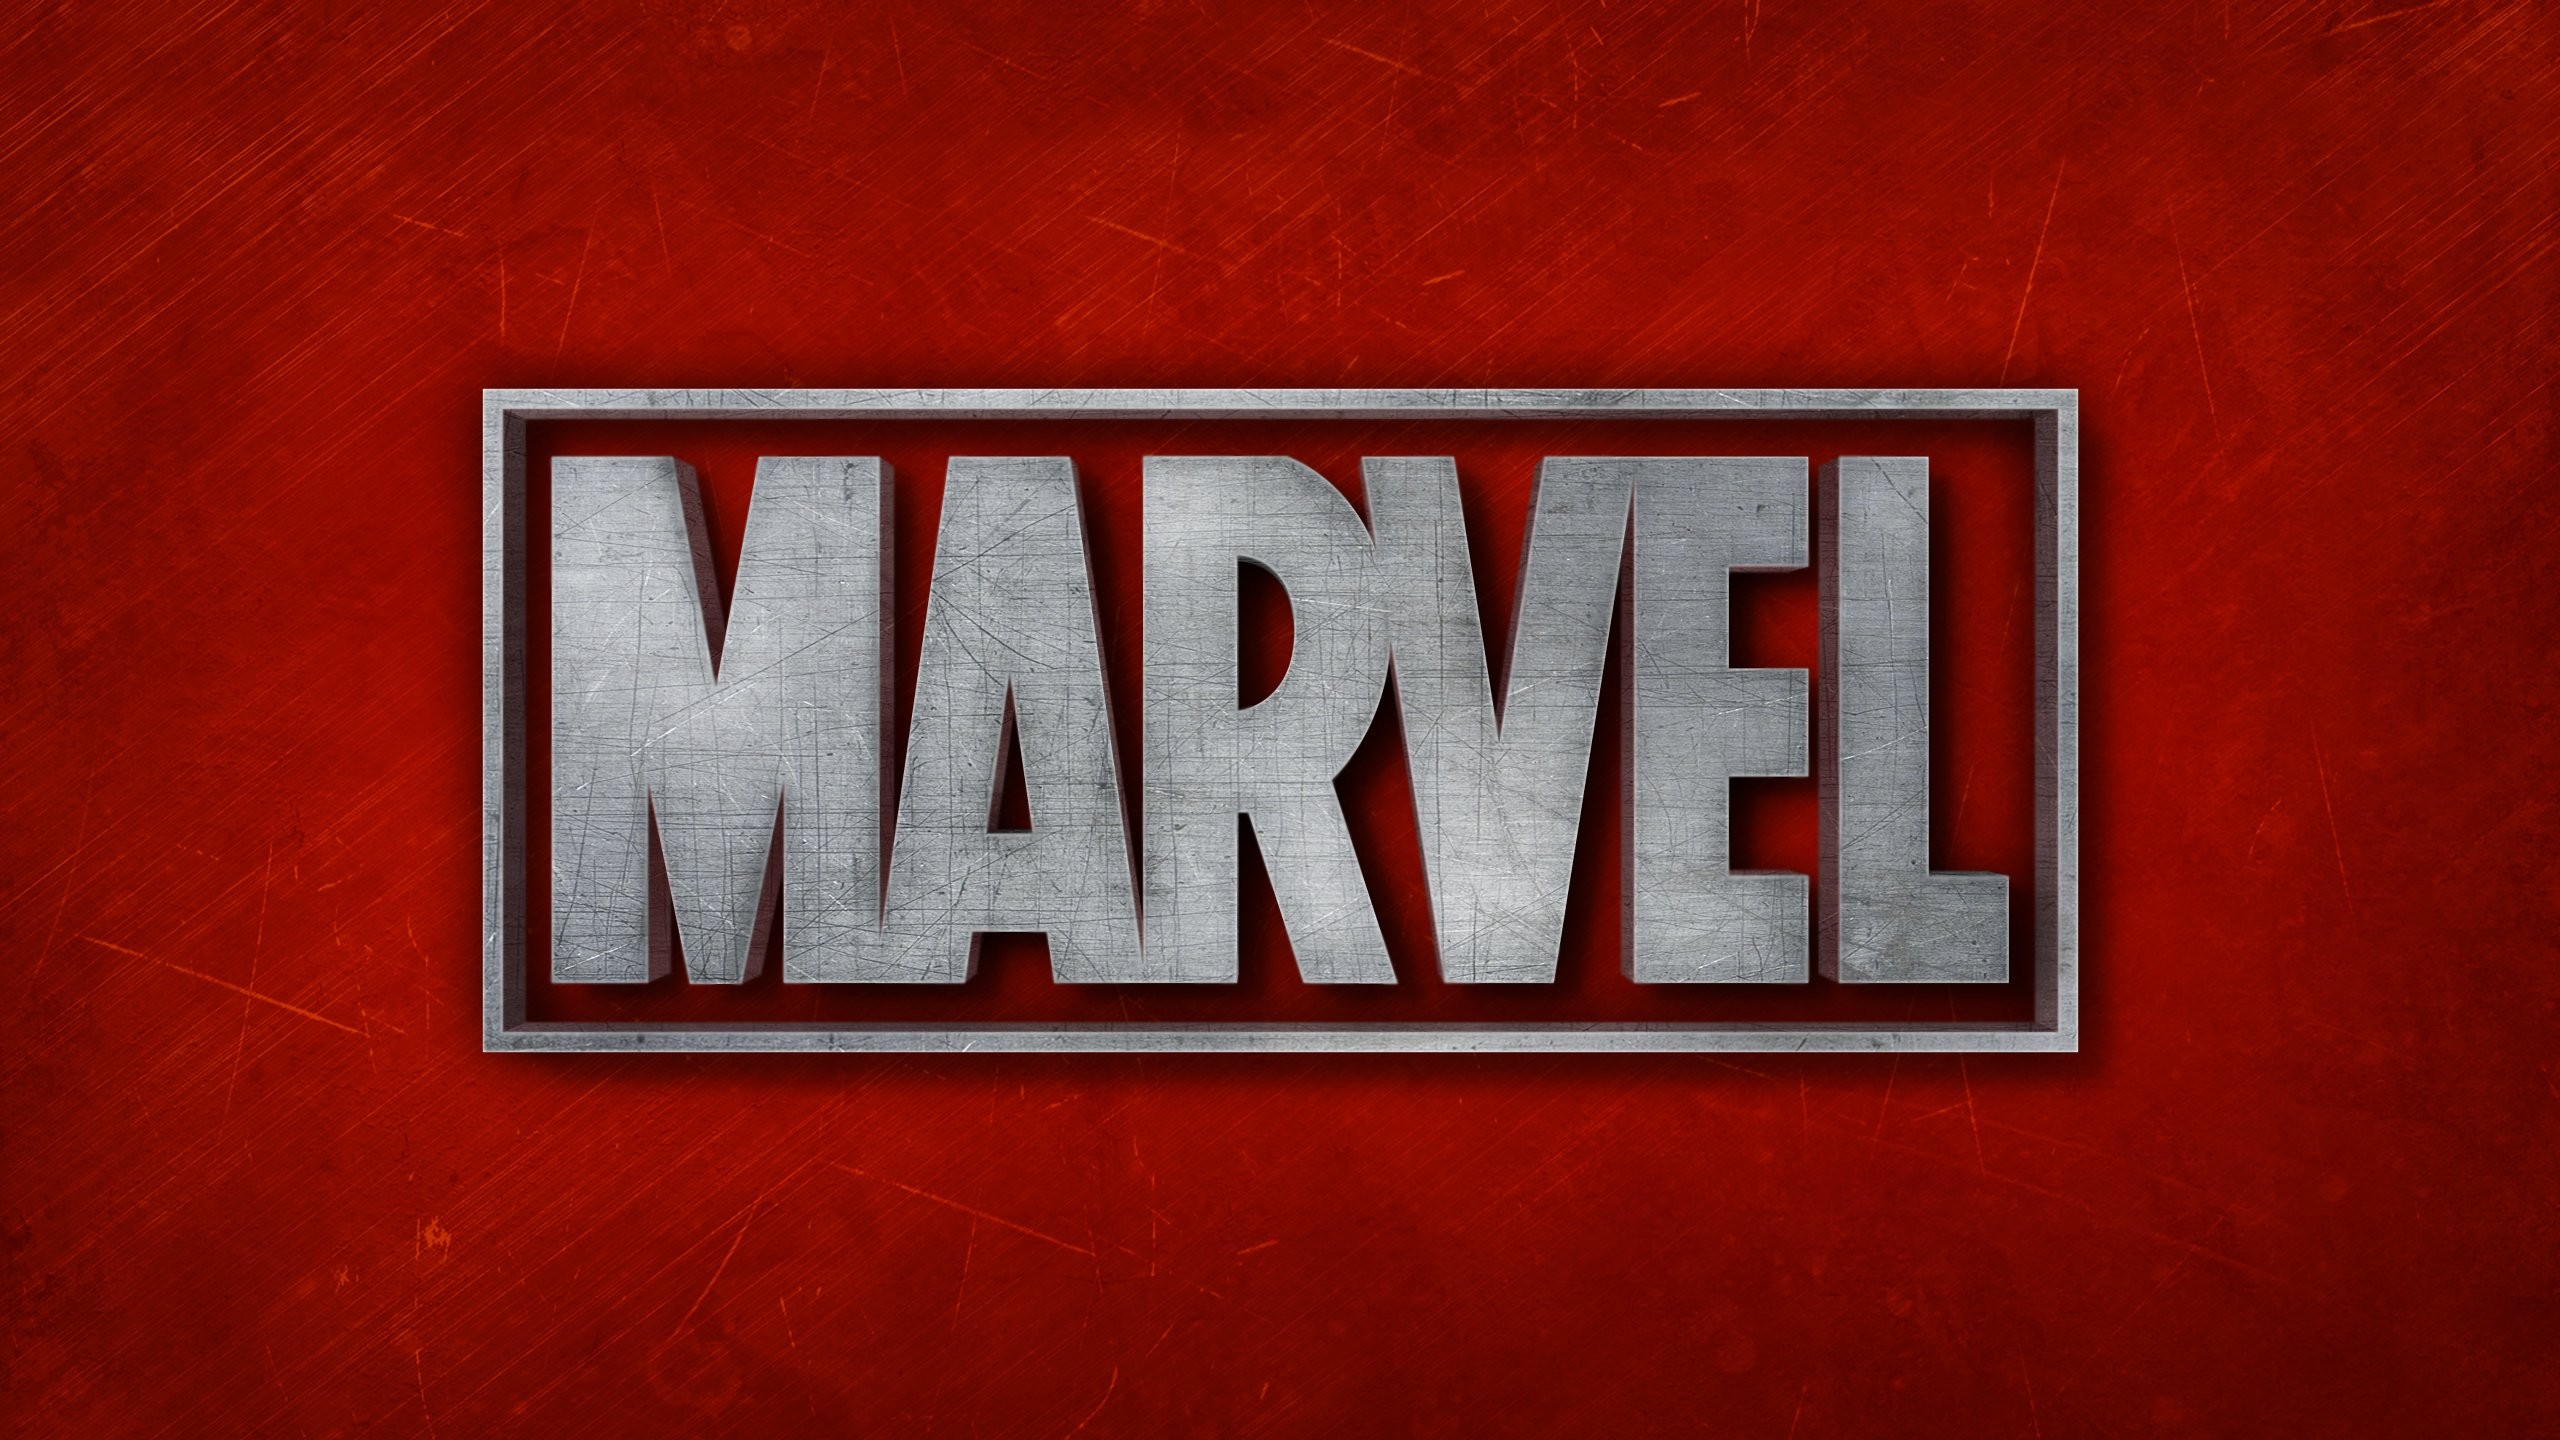 General 2560x1440 red background simple background Marvel Cinematic Universe